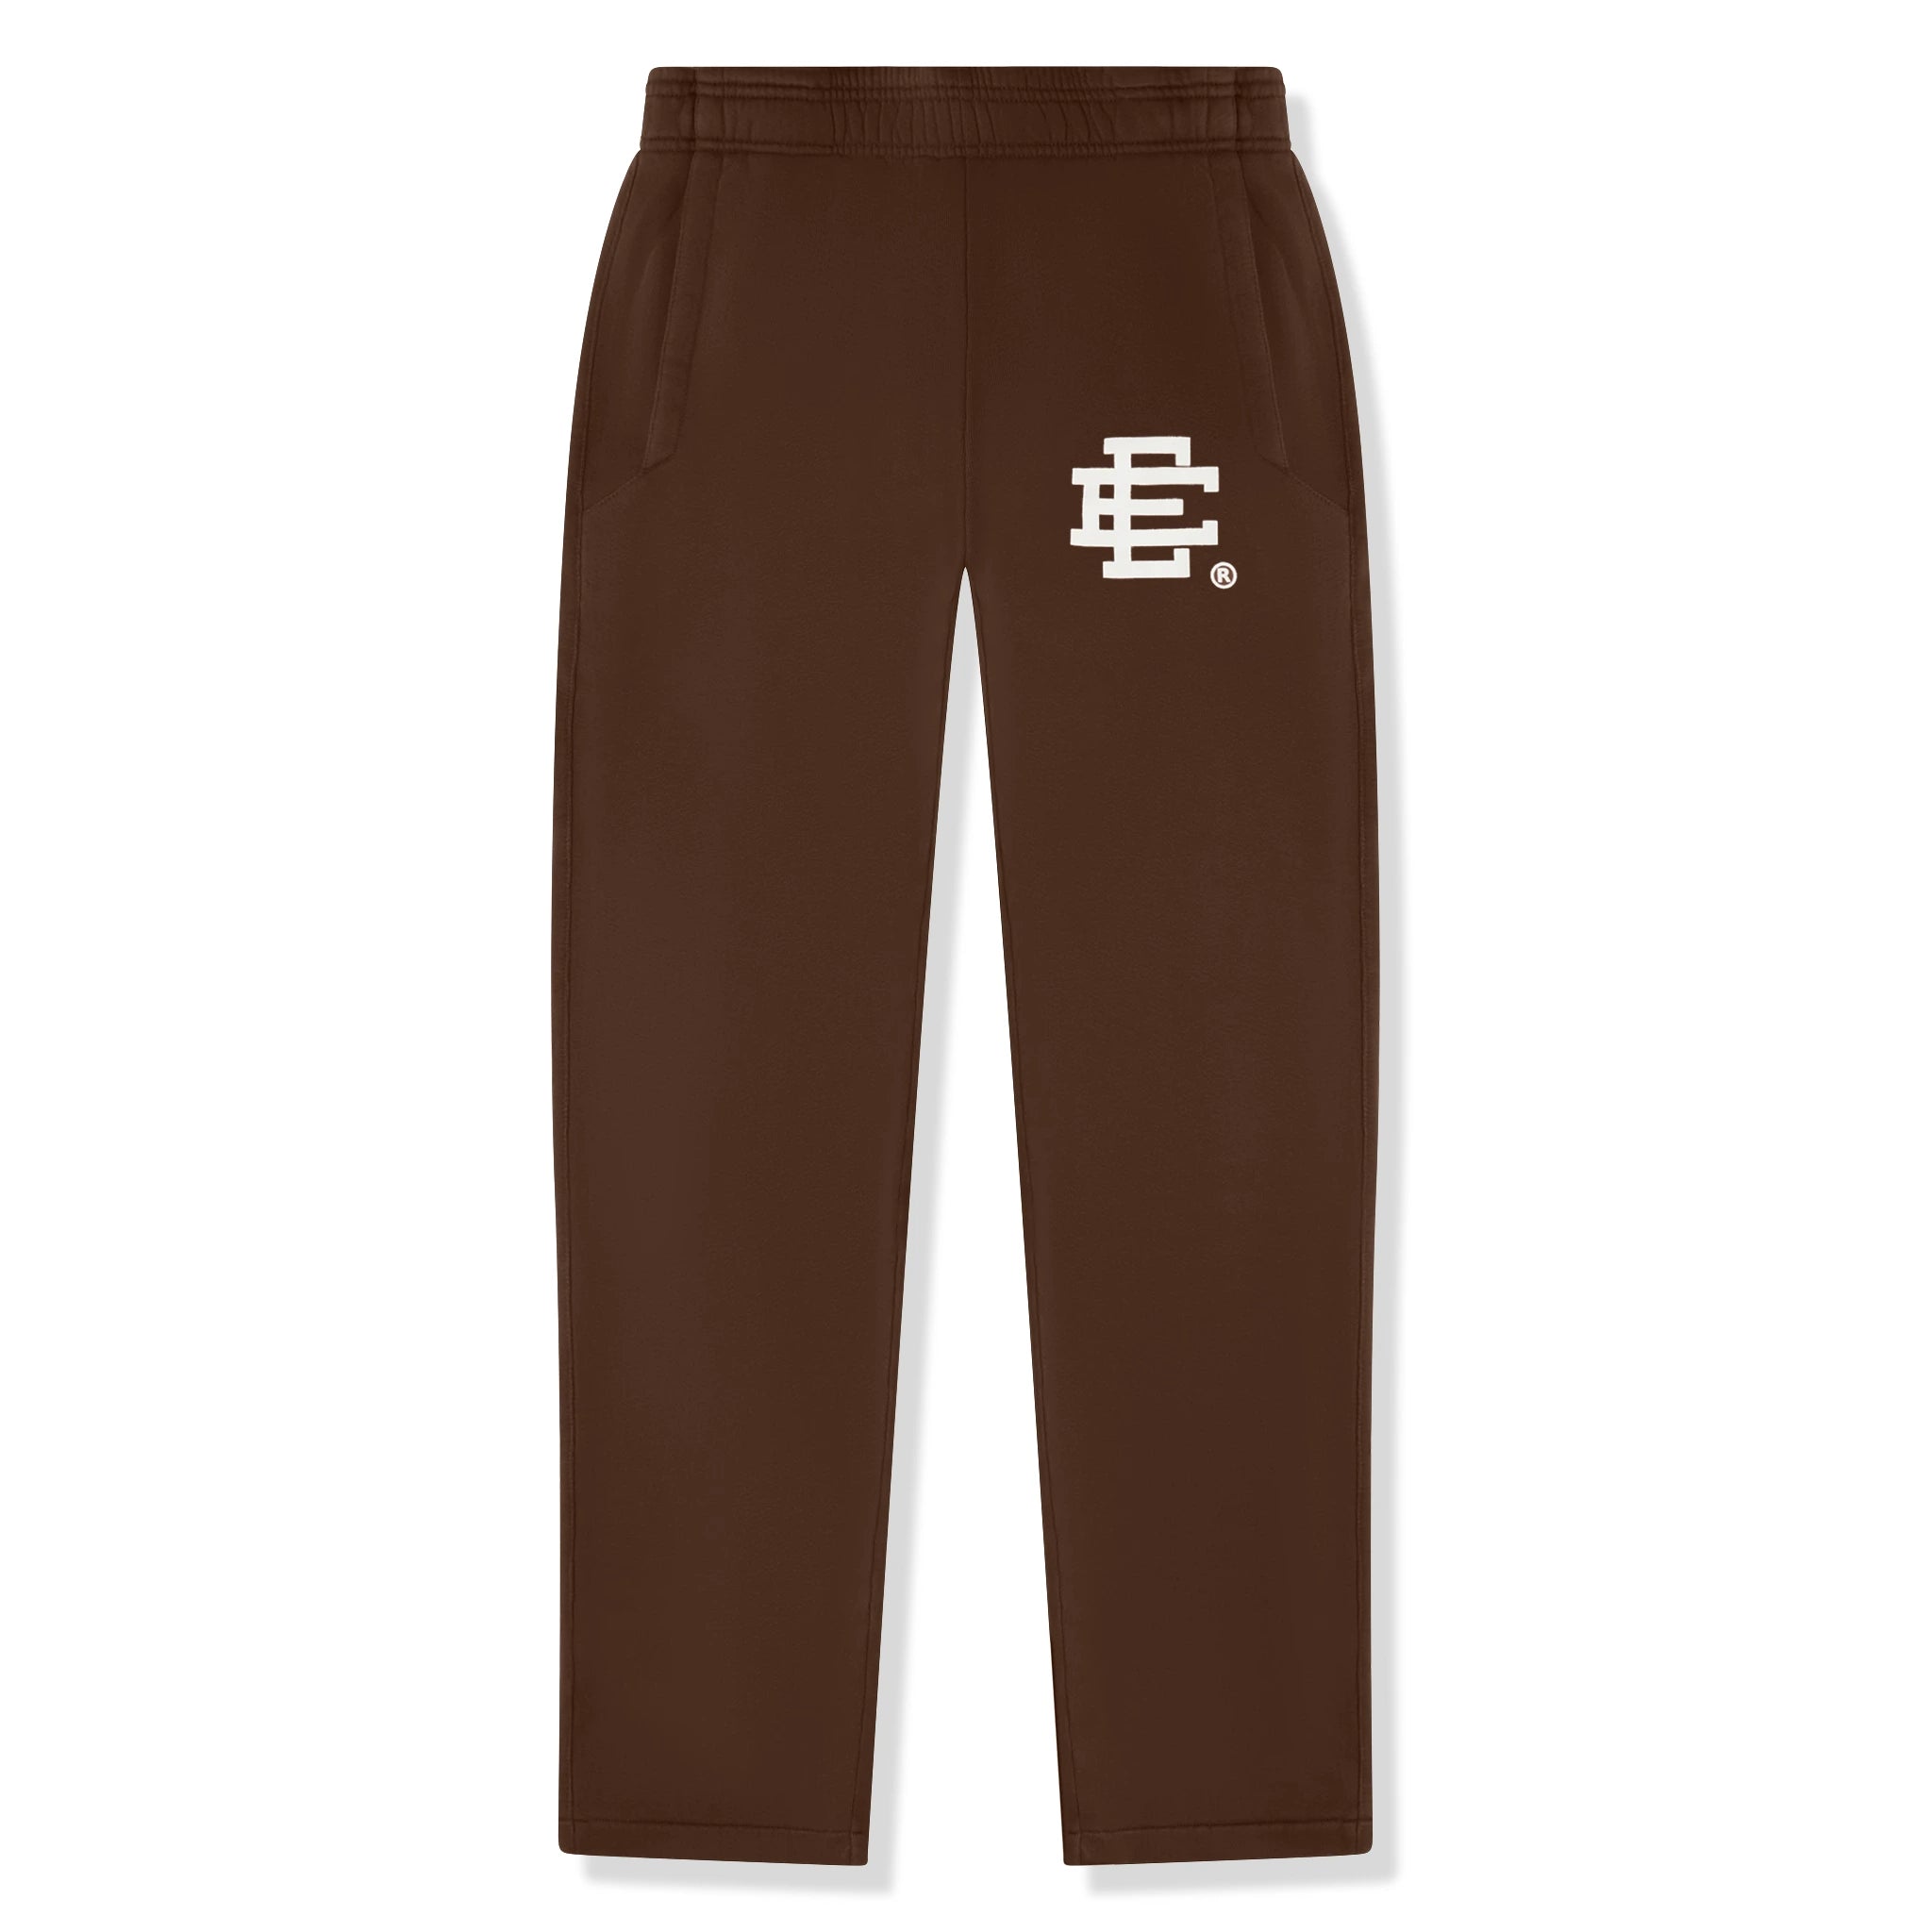 Front view of Eric Emanuel EE Basic Brown White Sweatpants